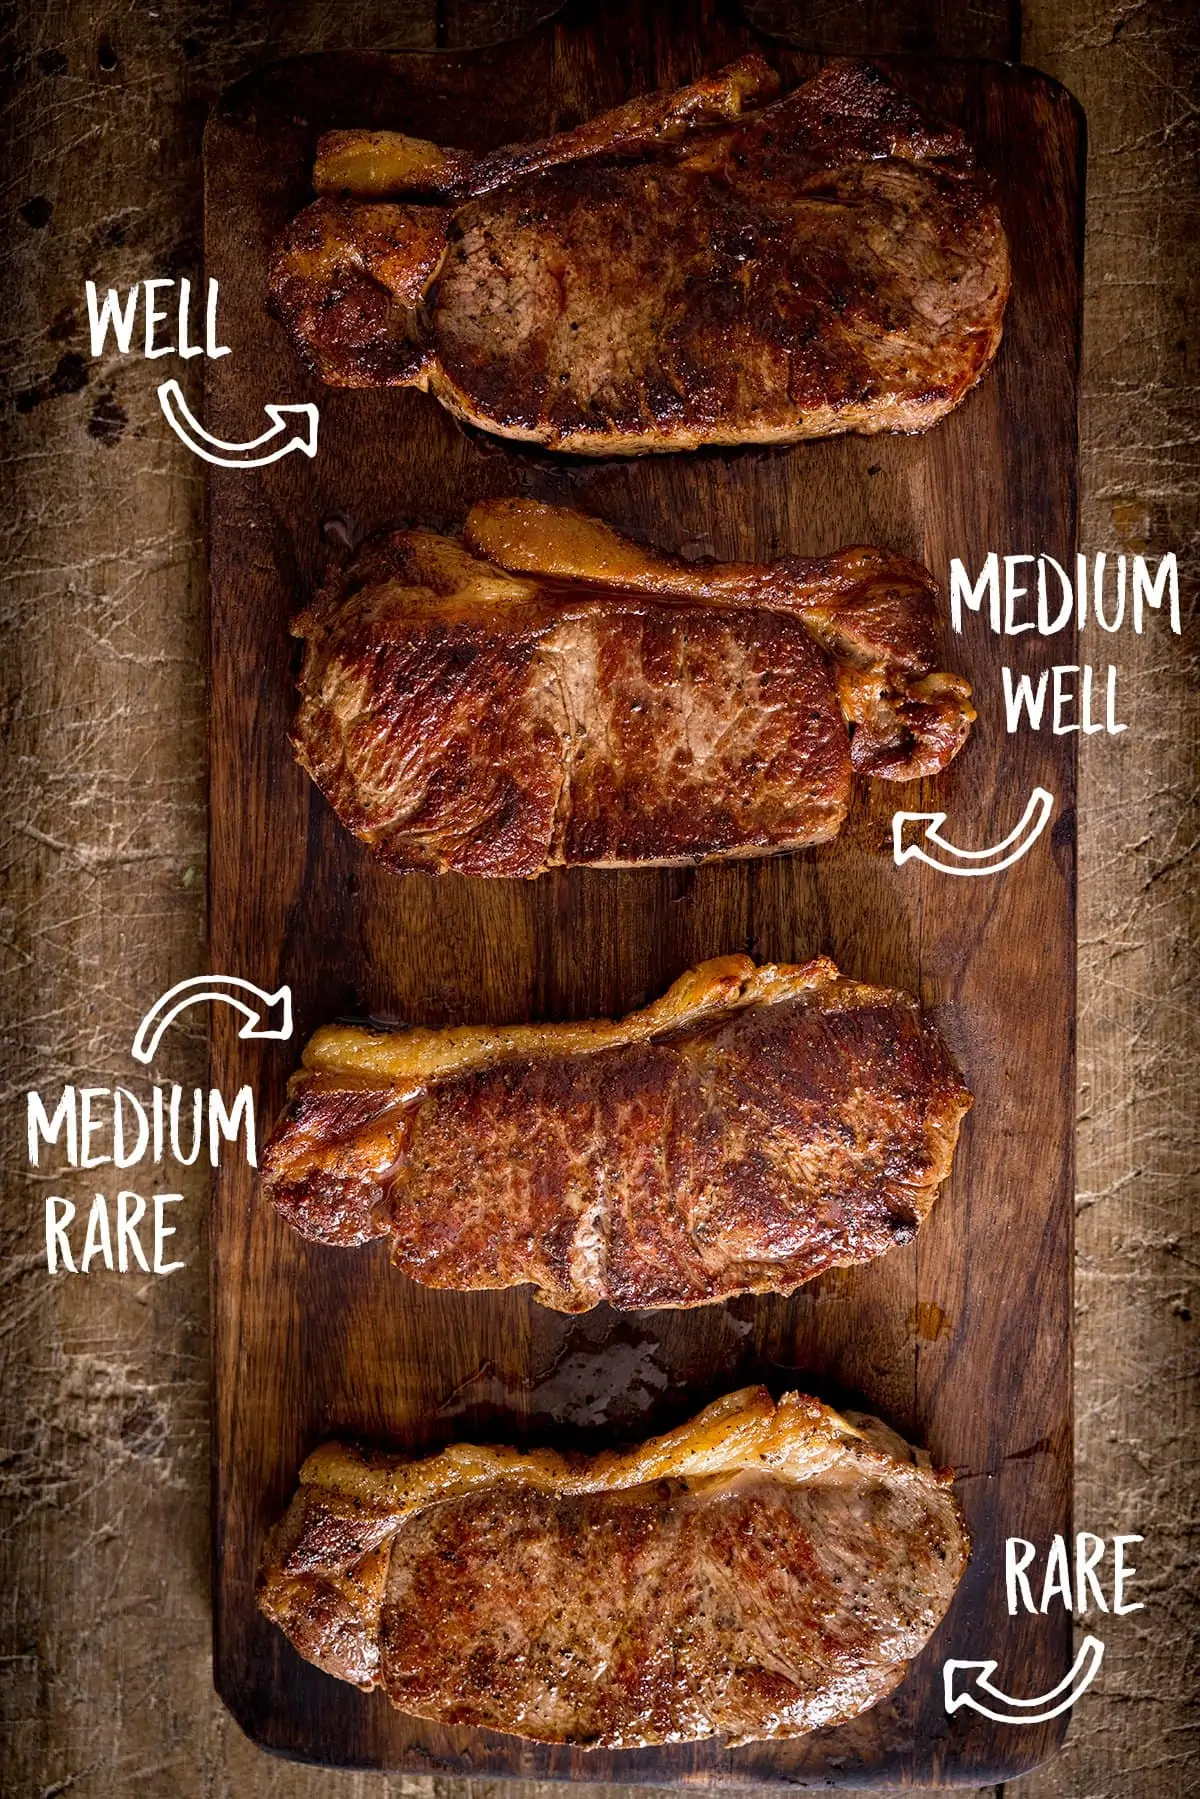 Overhead picture of 4 cooked steaks on a wooden board showing 4 different levels of cooking labelled well, medium well, medium rare and rare.